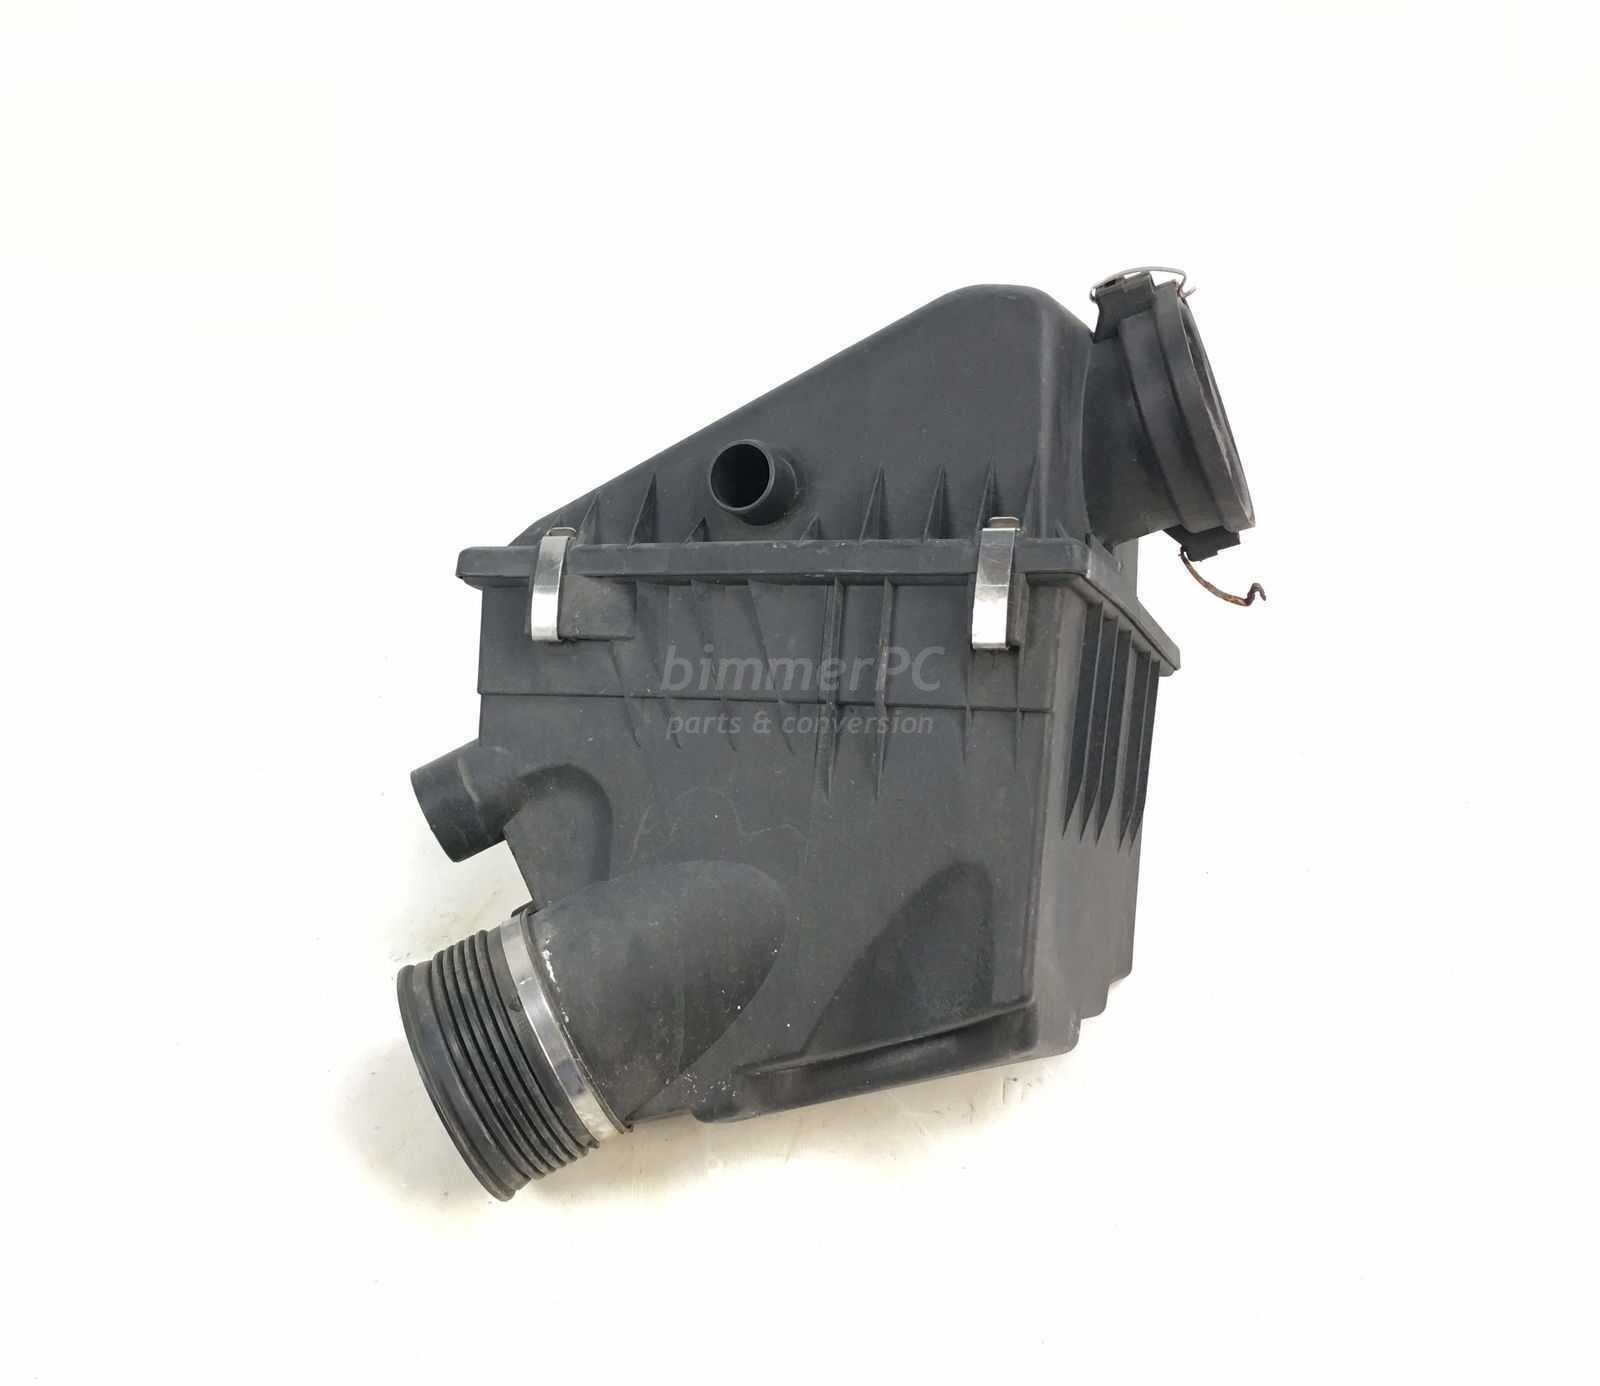 Primary image for BMW E38 740iL 740i Intake Air Box Filter Cleaner Housing M62tu V8 1999-2001 OEM